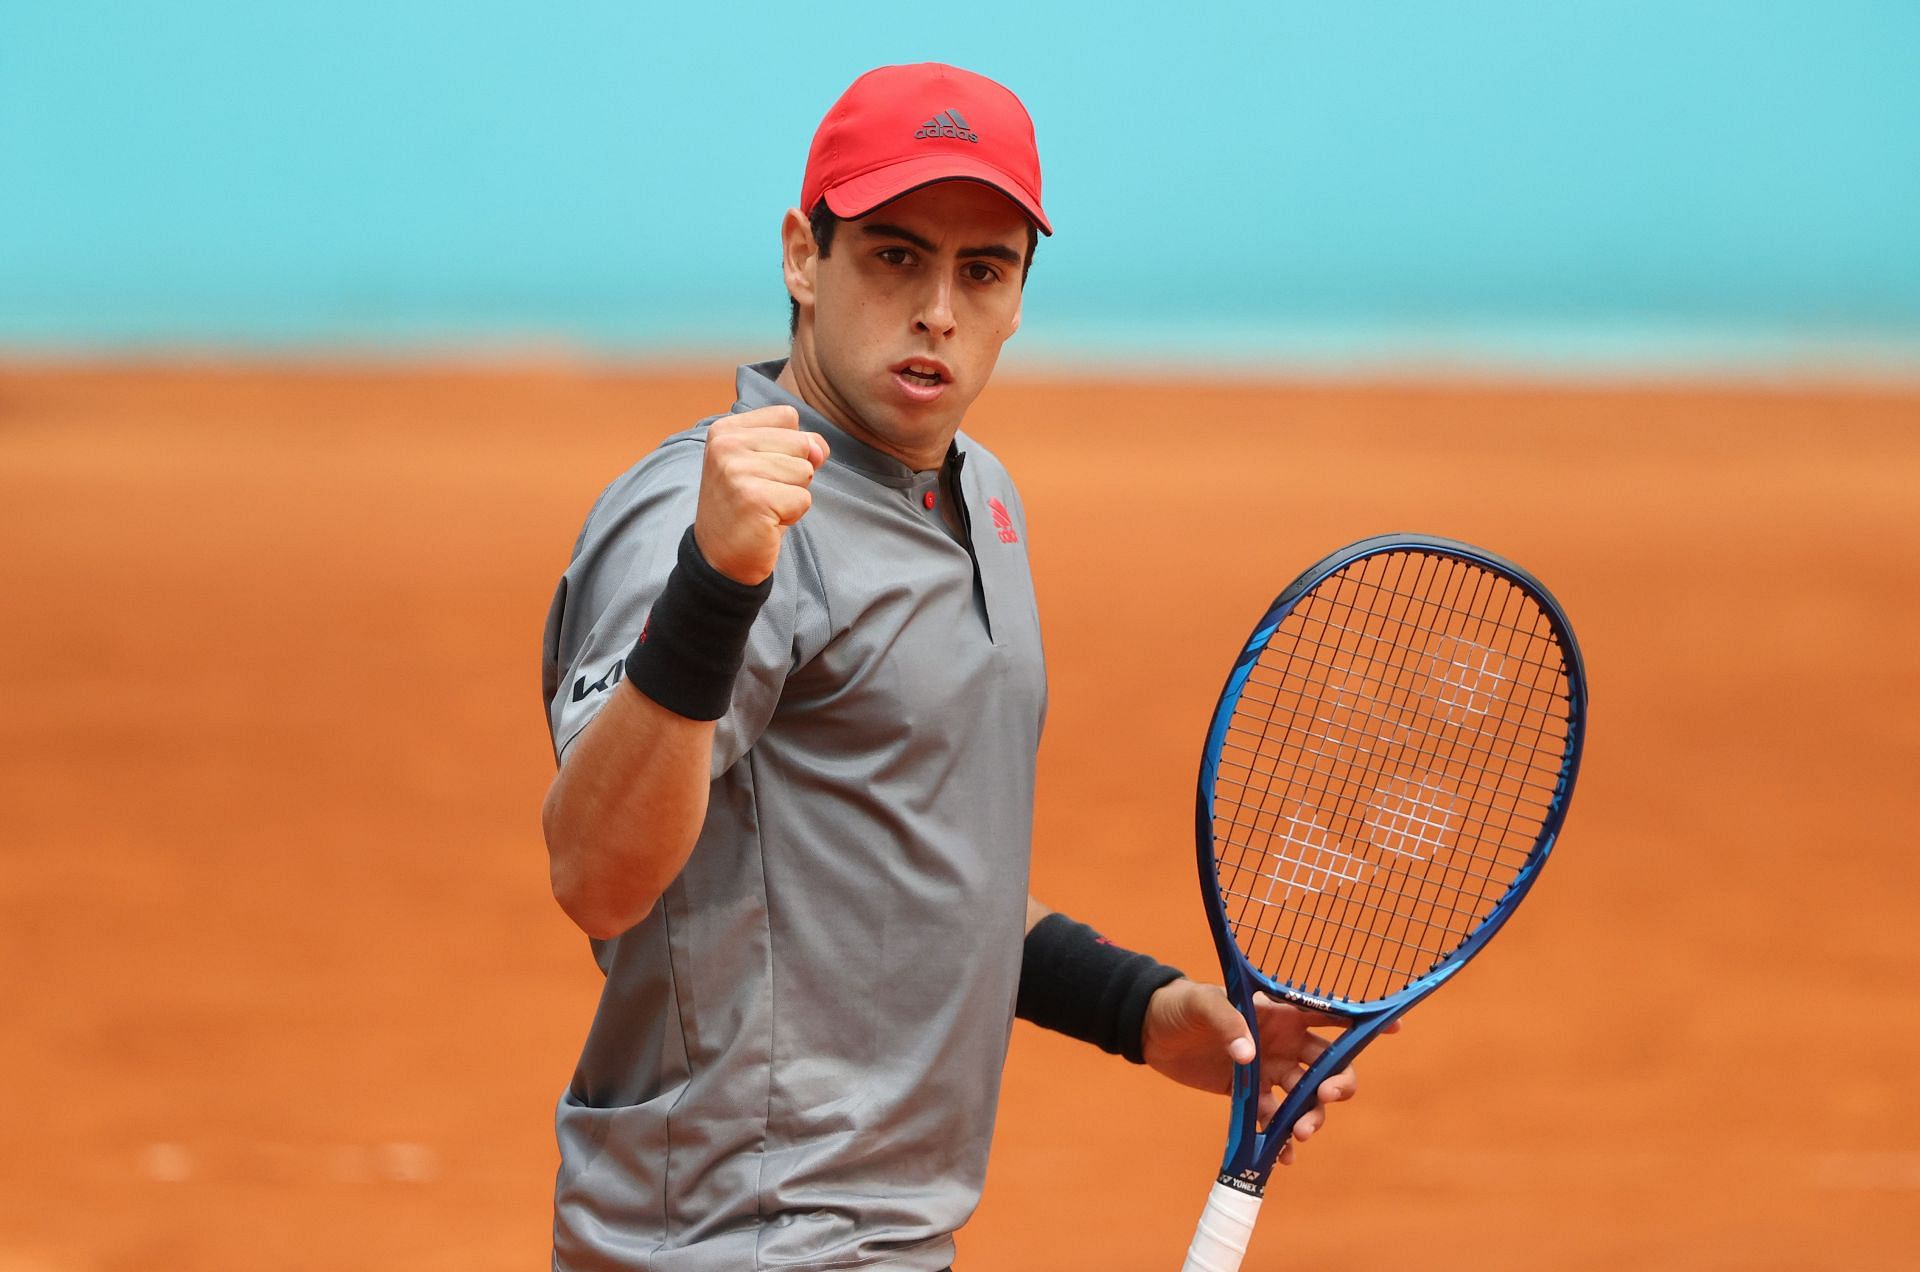 Munar at the Madrid Open in 2021